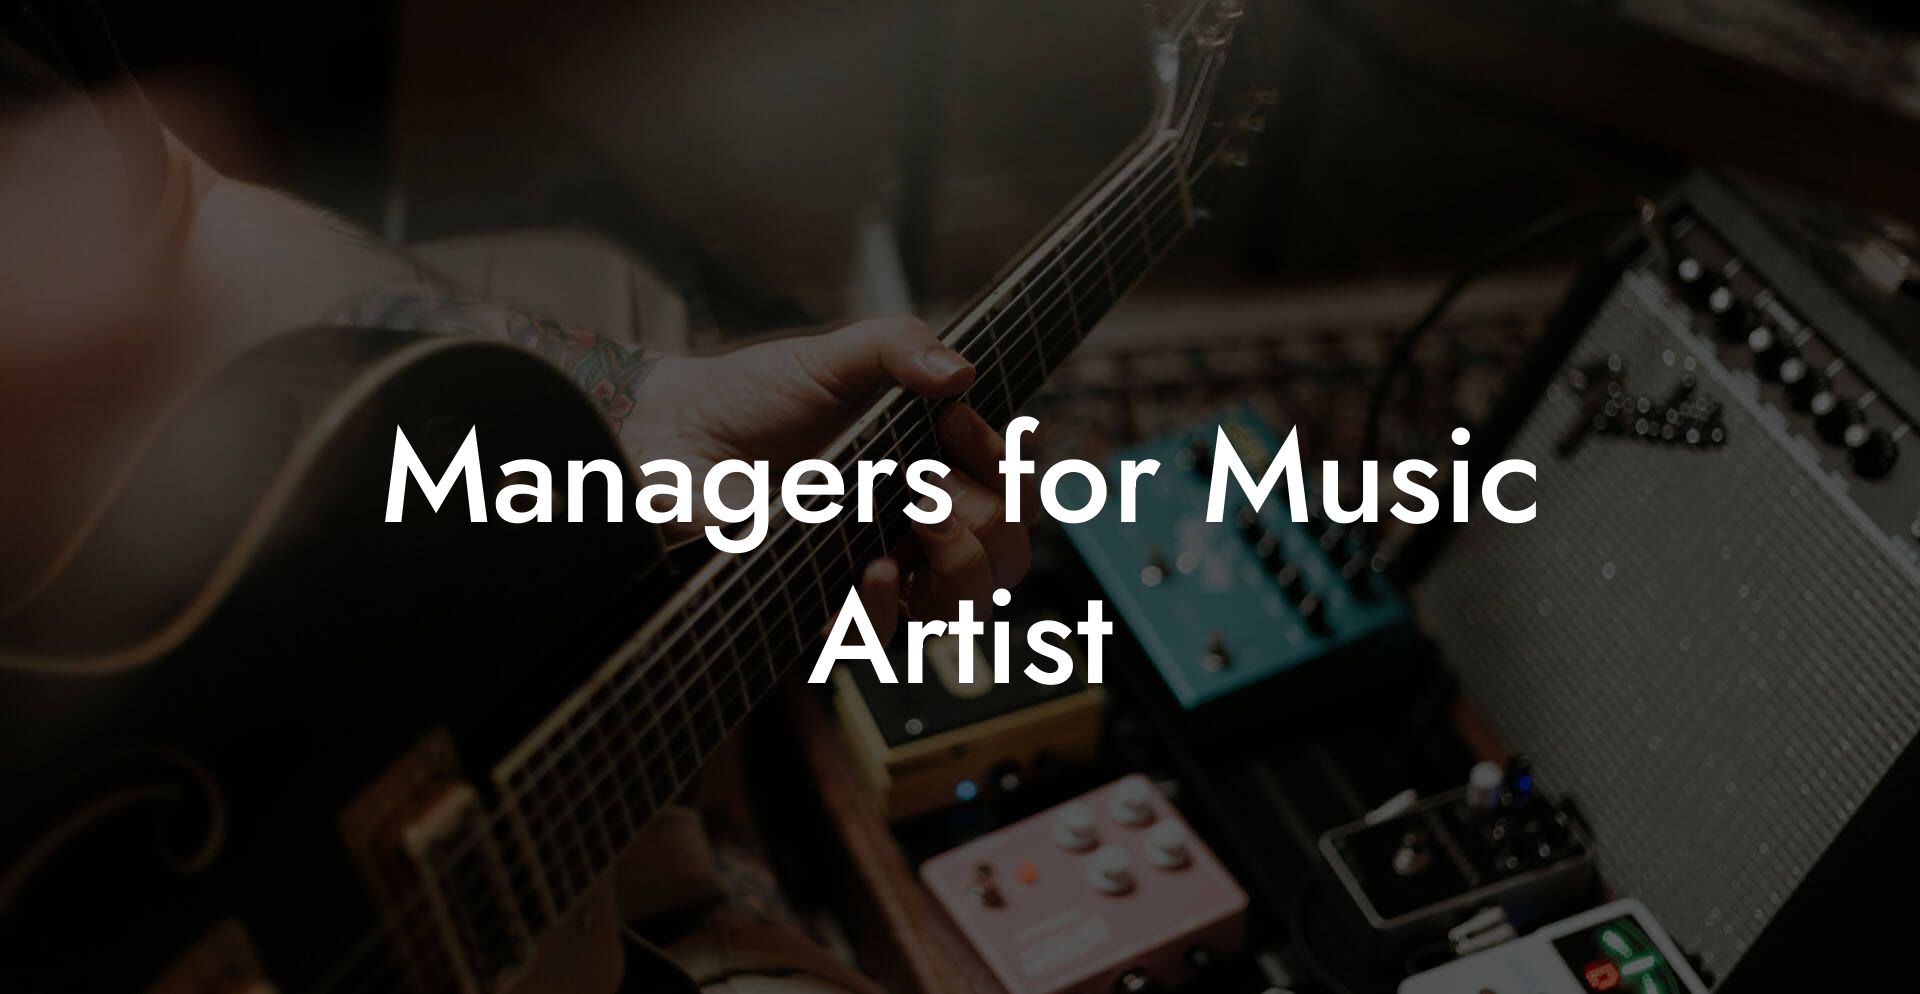 Managers for Music Artist